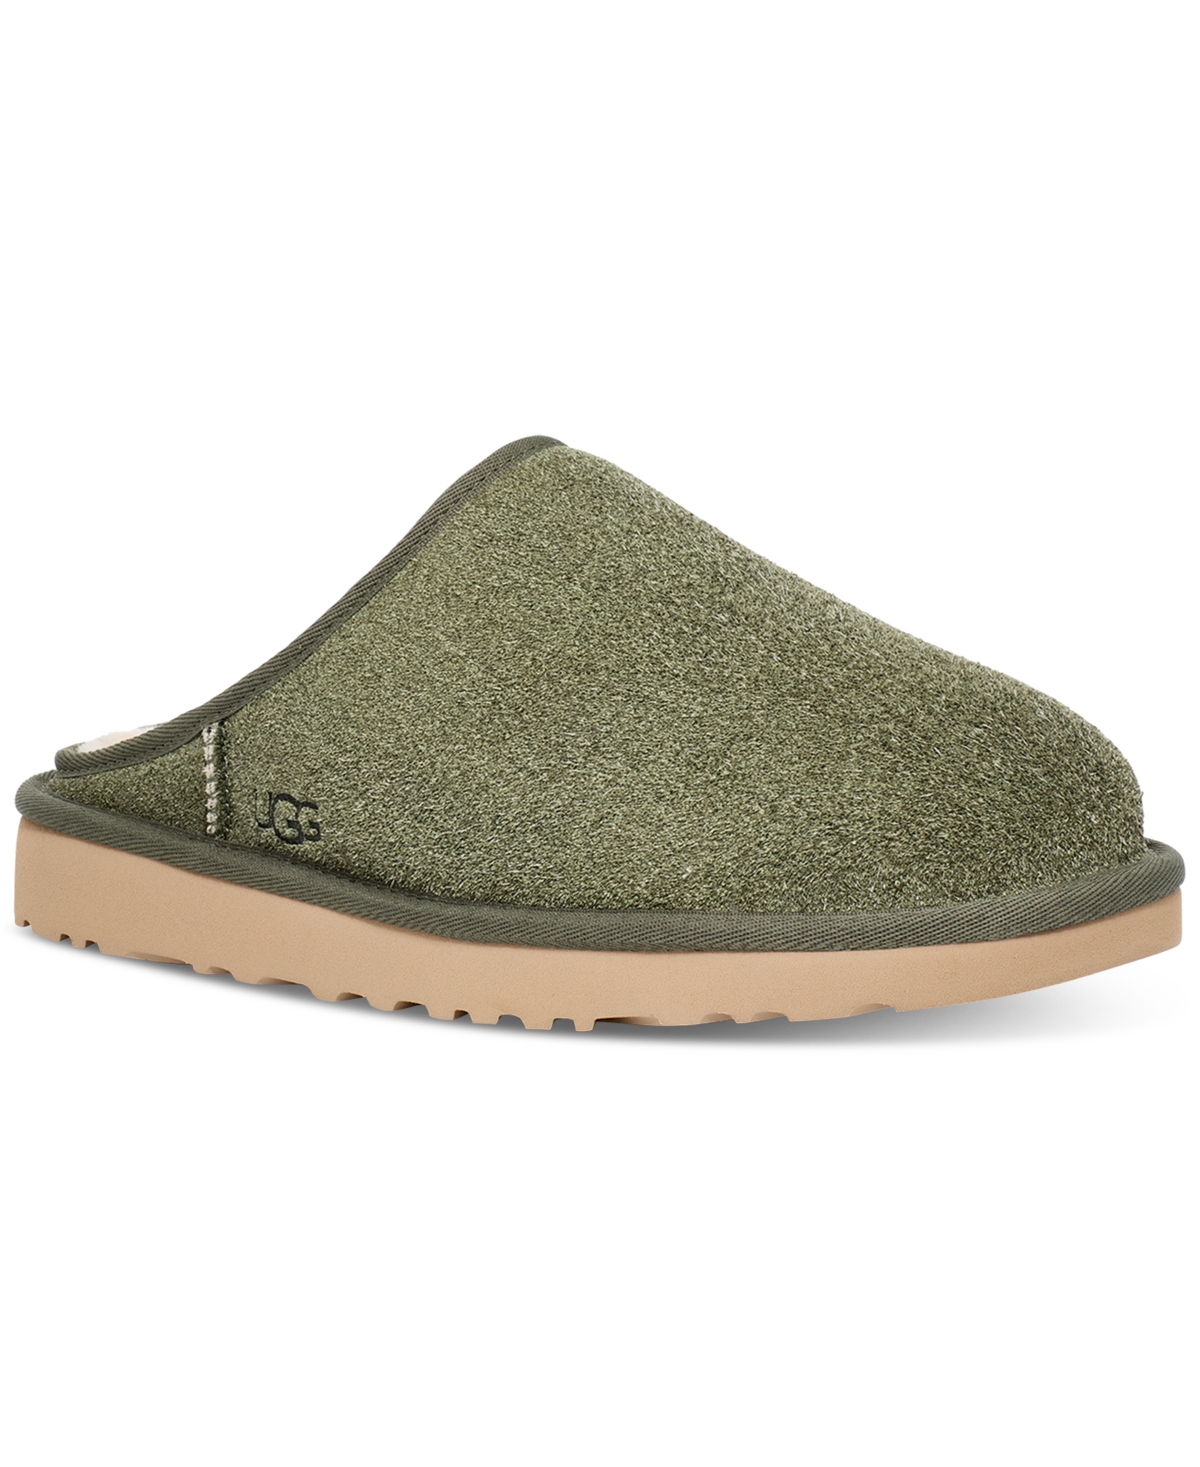 Men's Classic Slip on Shaggy Suede Slippers - Deep Shade